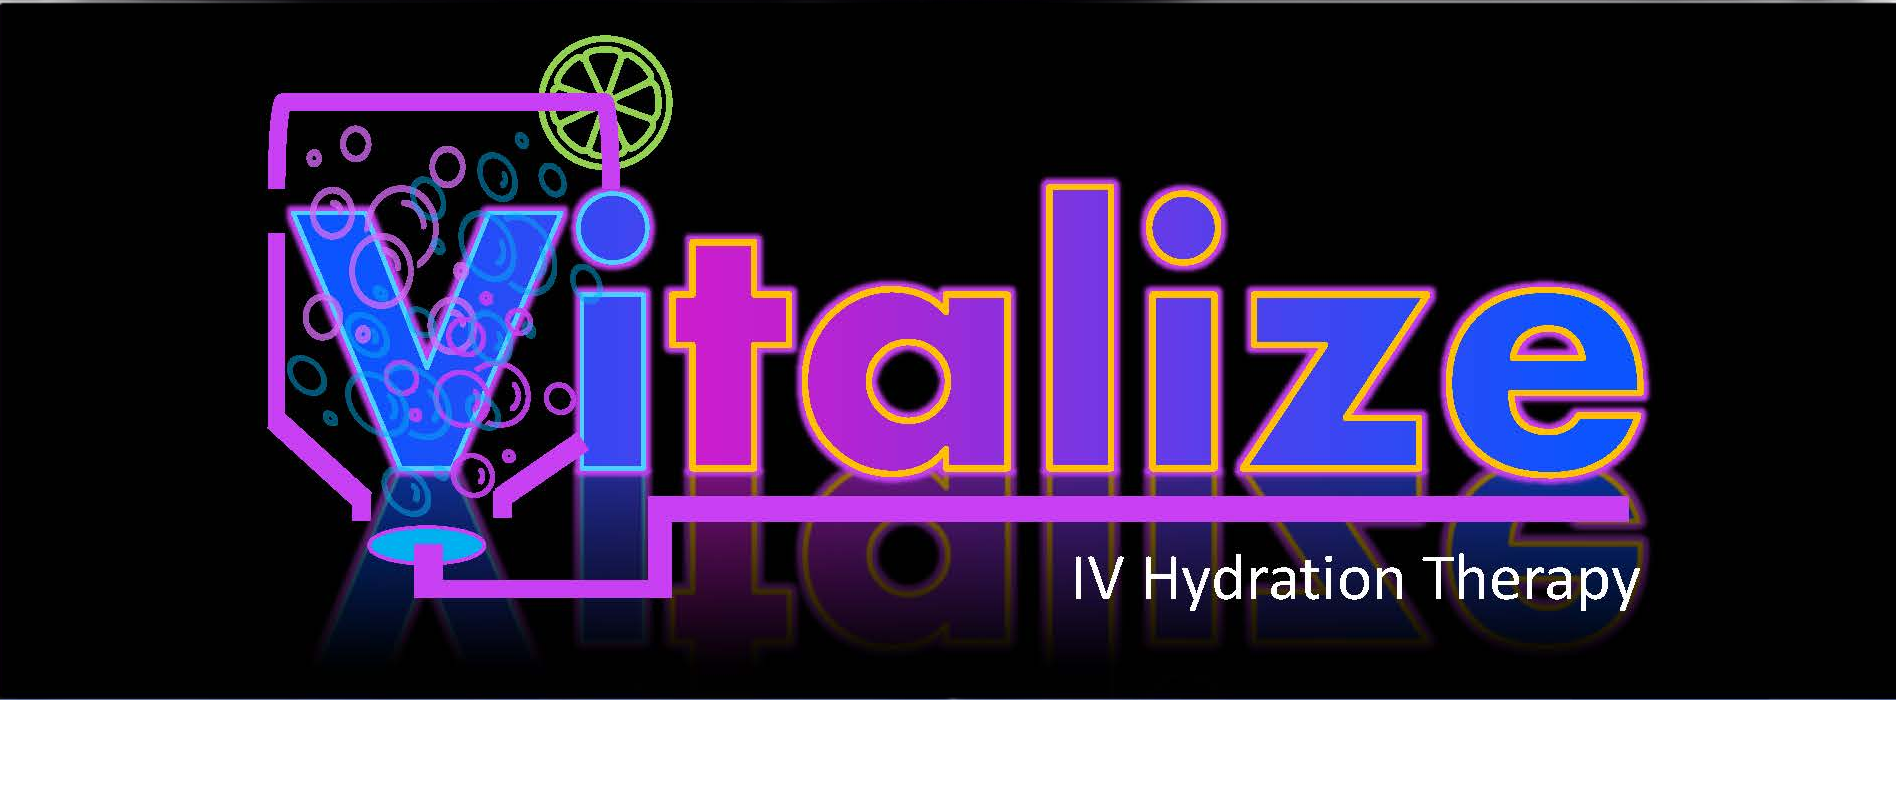 Welcome to Vitalize IV Hydration.